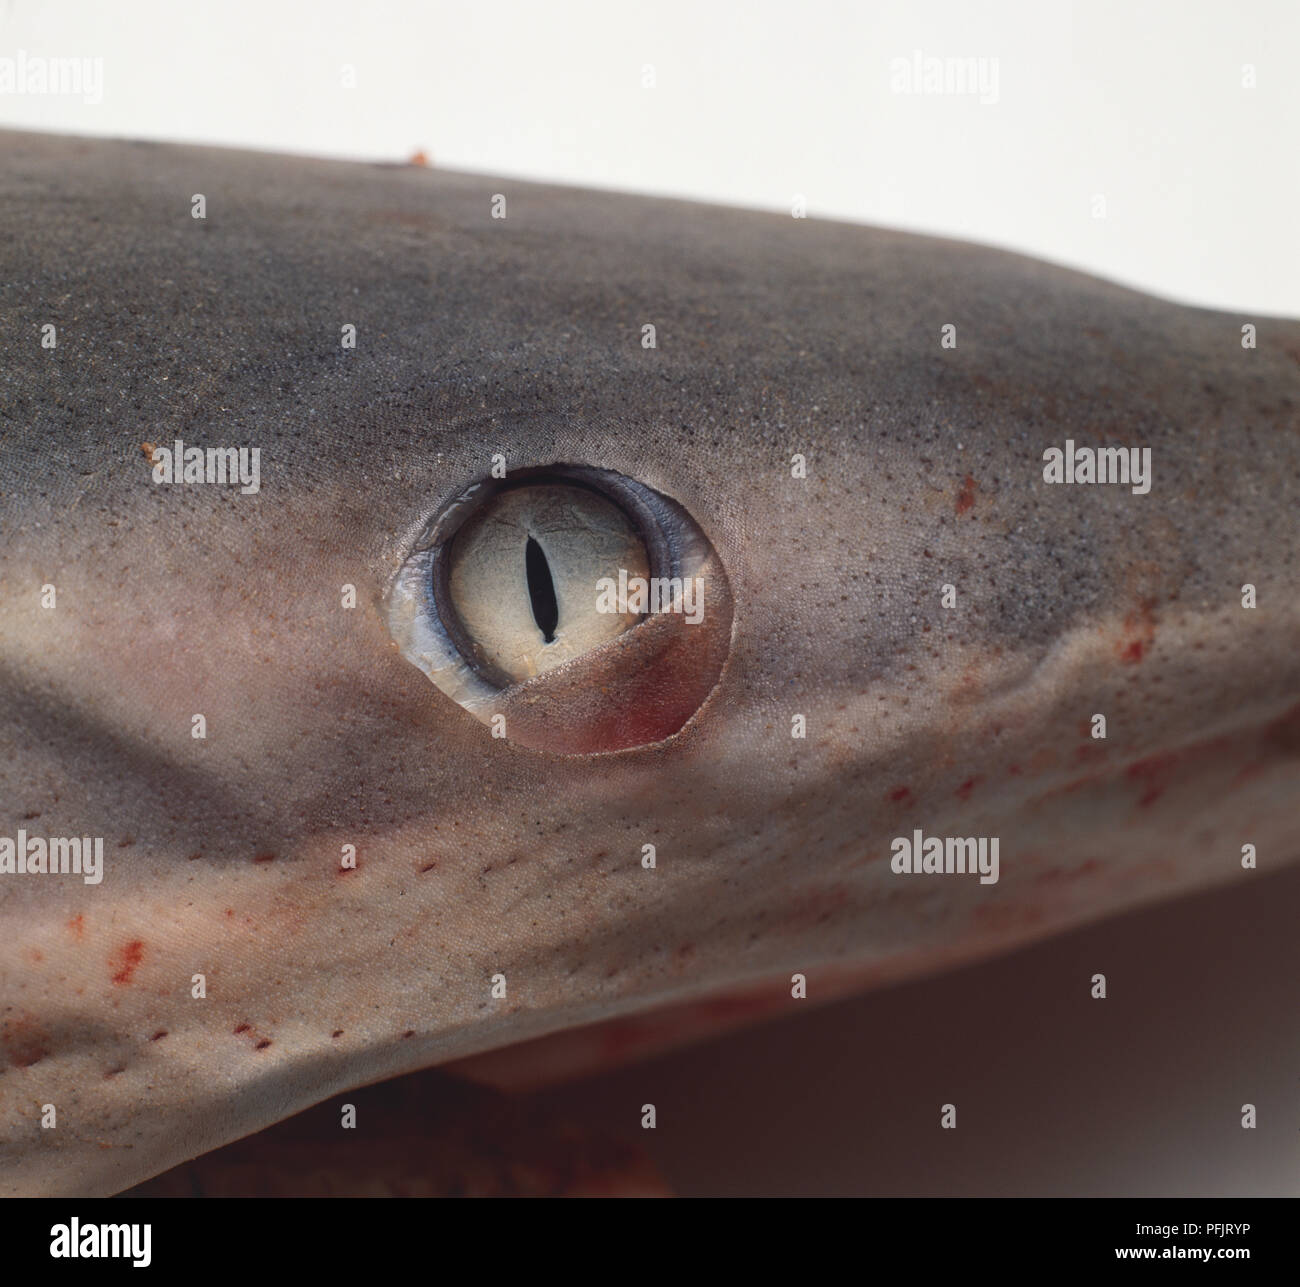 Shark's eye with a slit pupil, close up Stock Photo